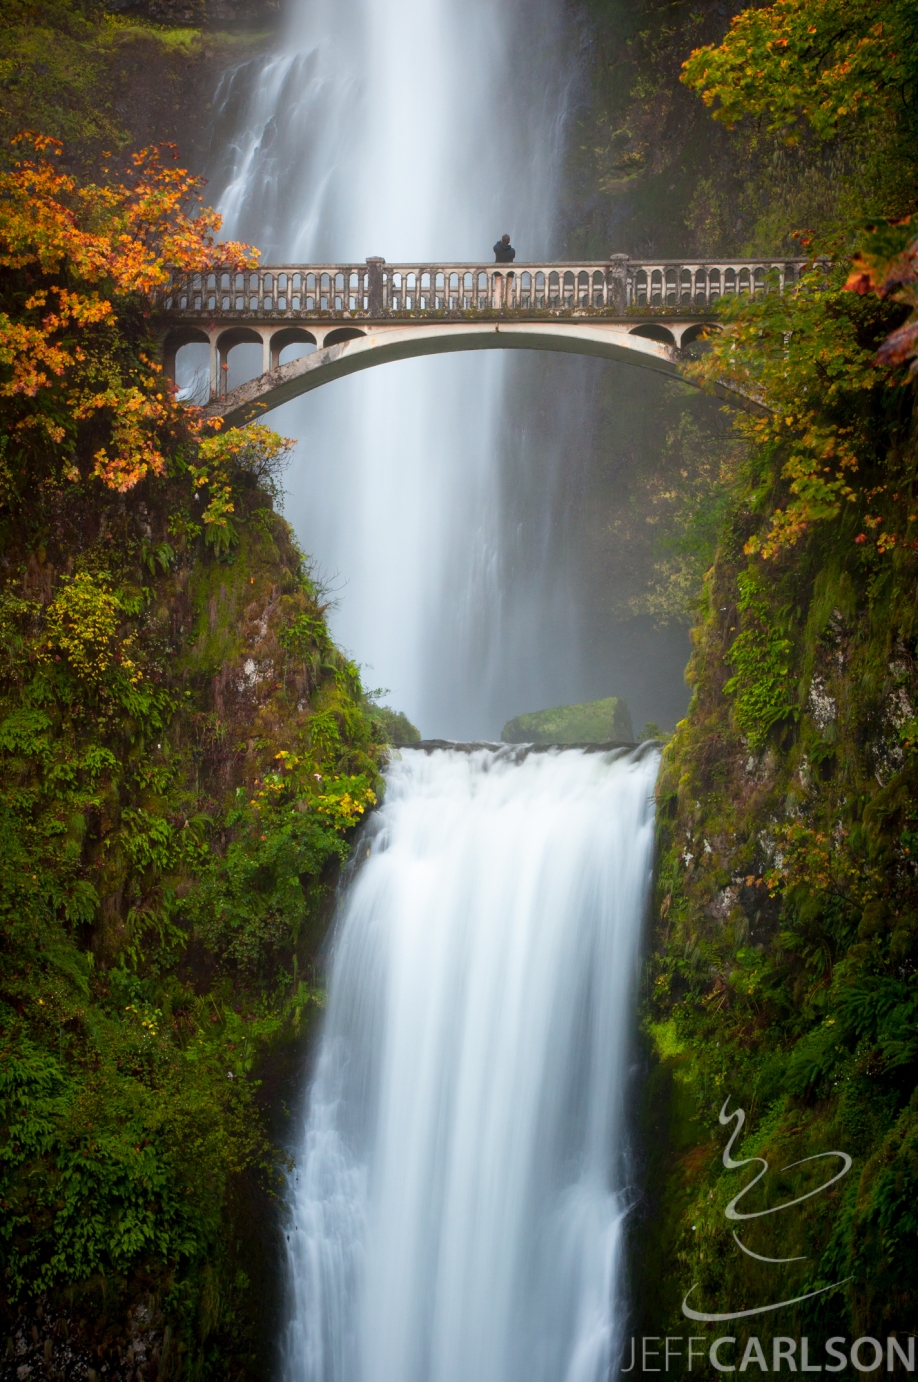 One cannot go on a photo trip to Oregon without getting a shot of the famous falls. (And breakfast at the lodge is tasty, too.)